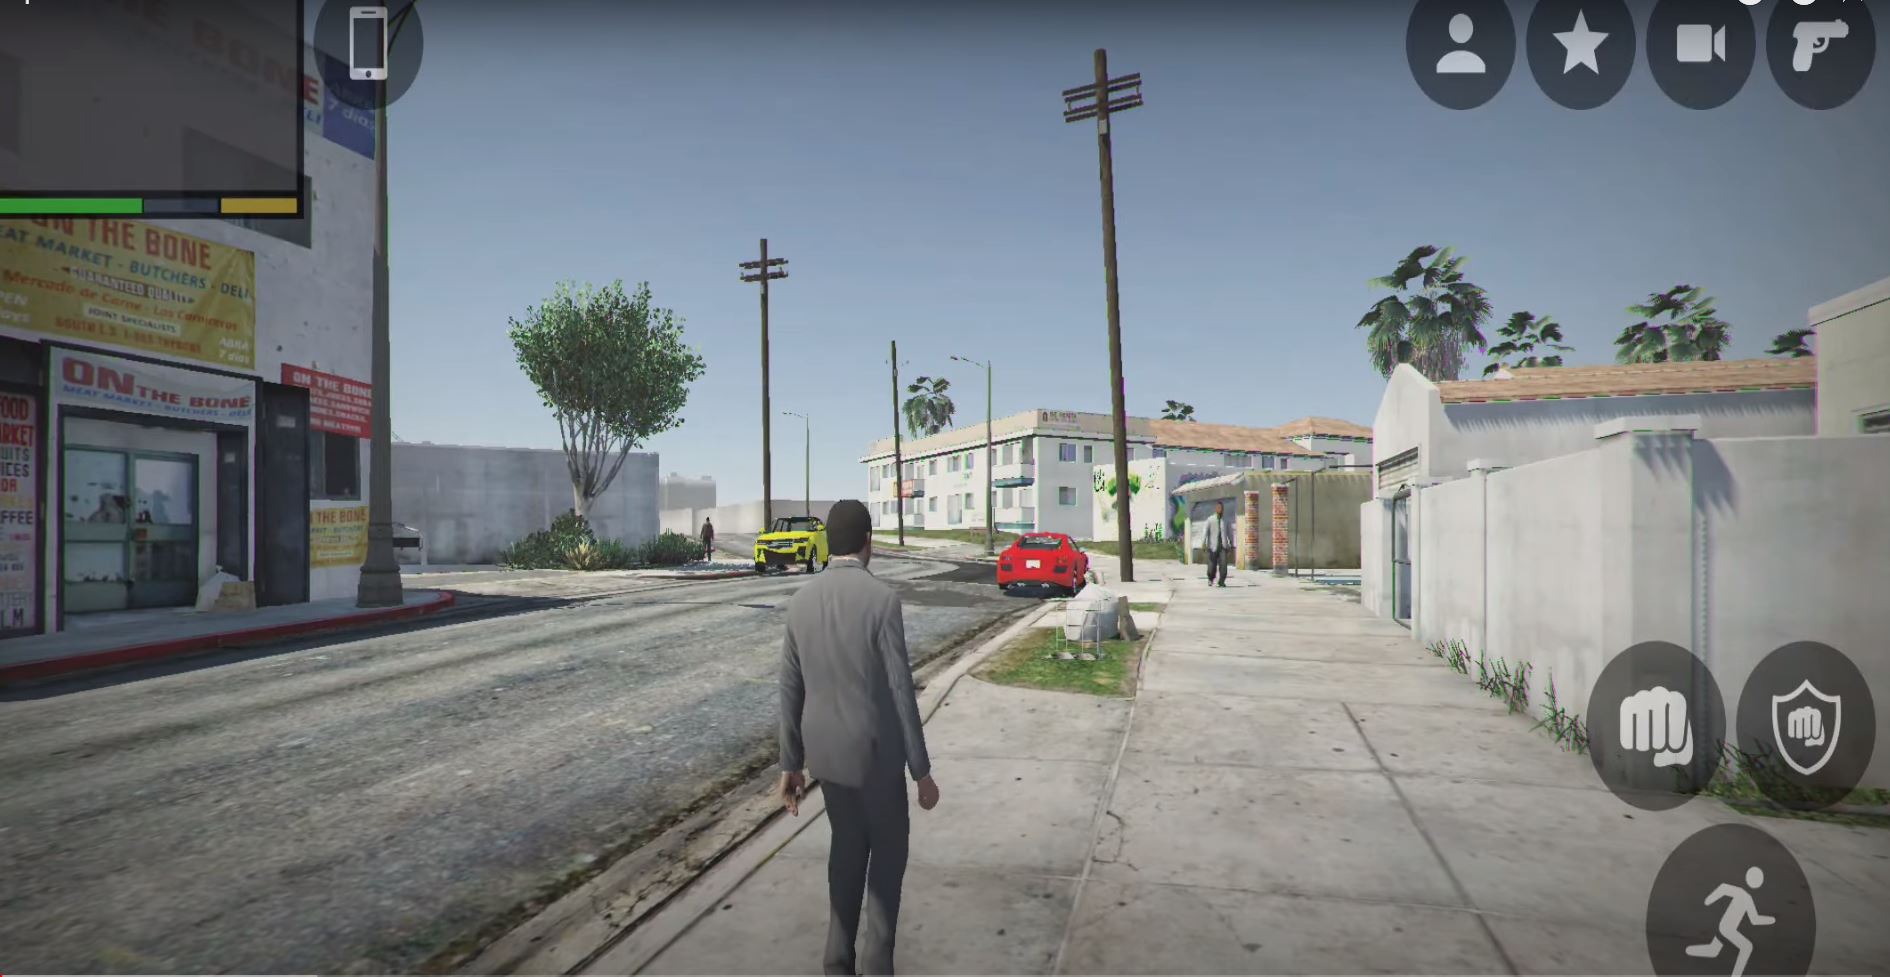 5 best games like GTA 5 for Android devices in 2021